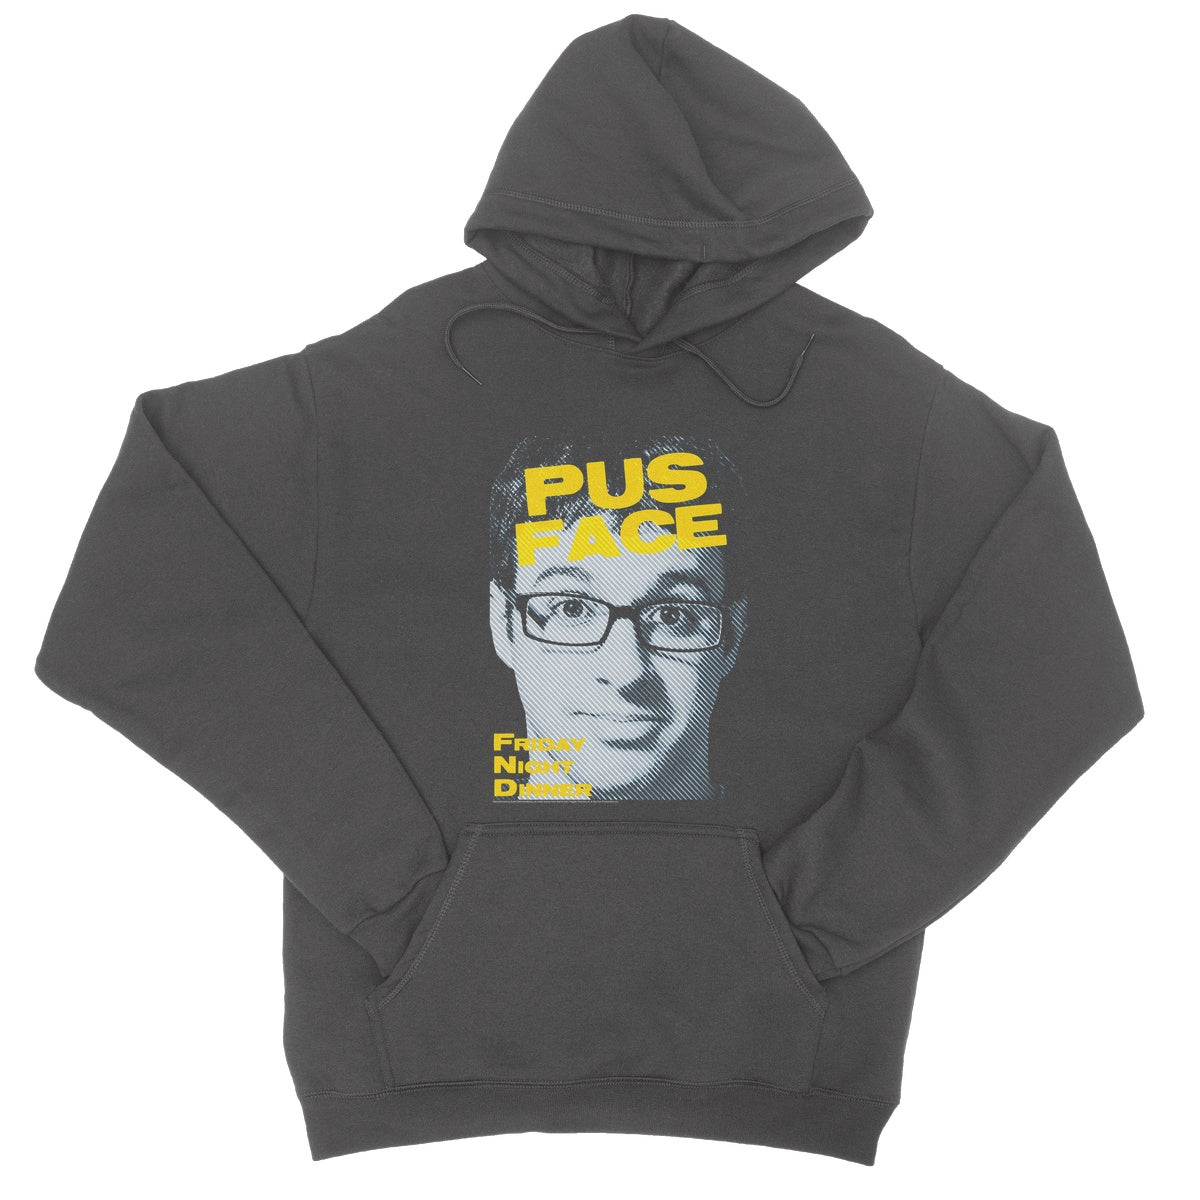 Pussface College Hoodie